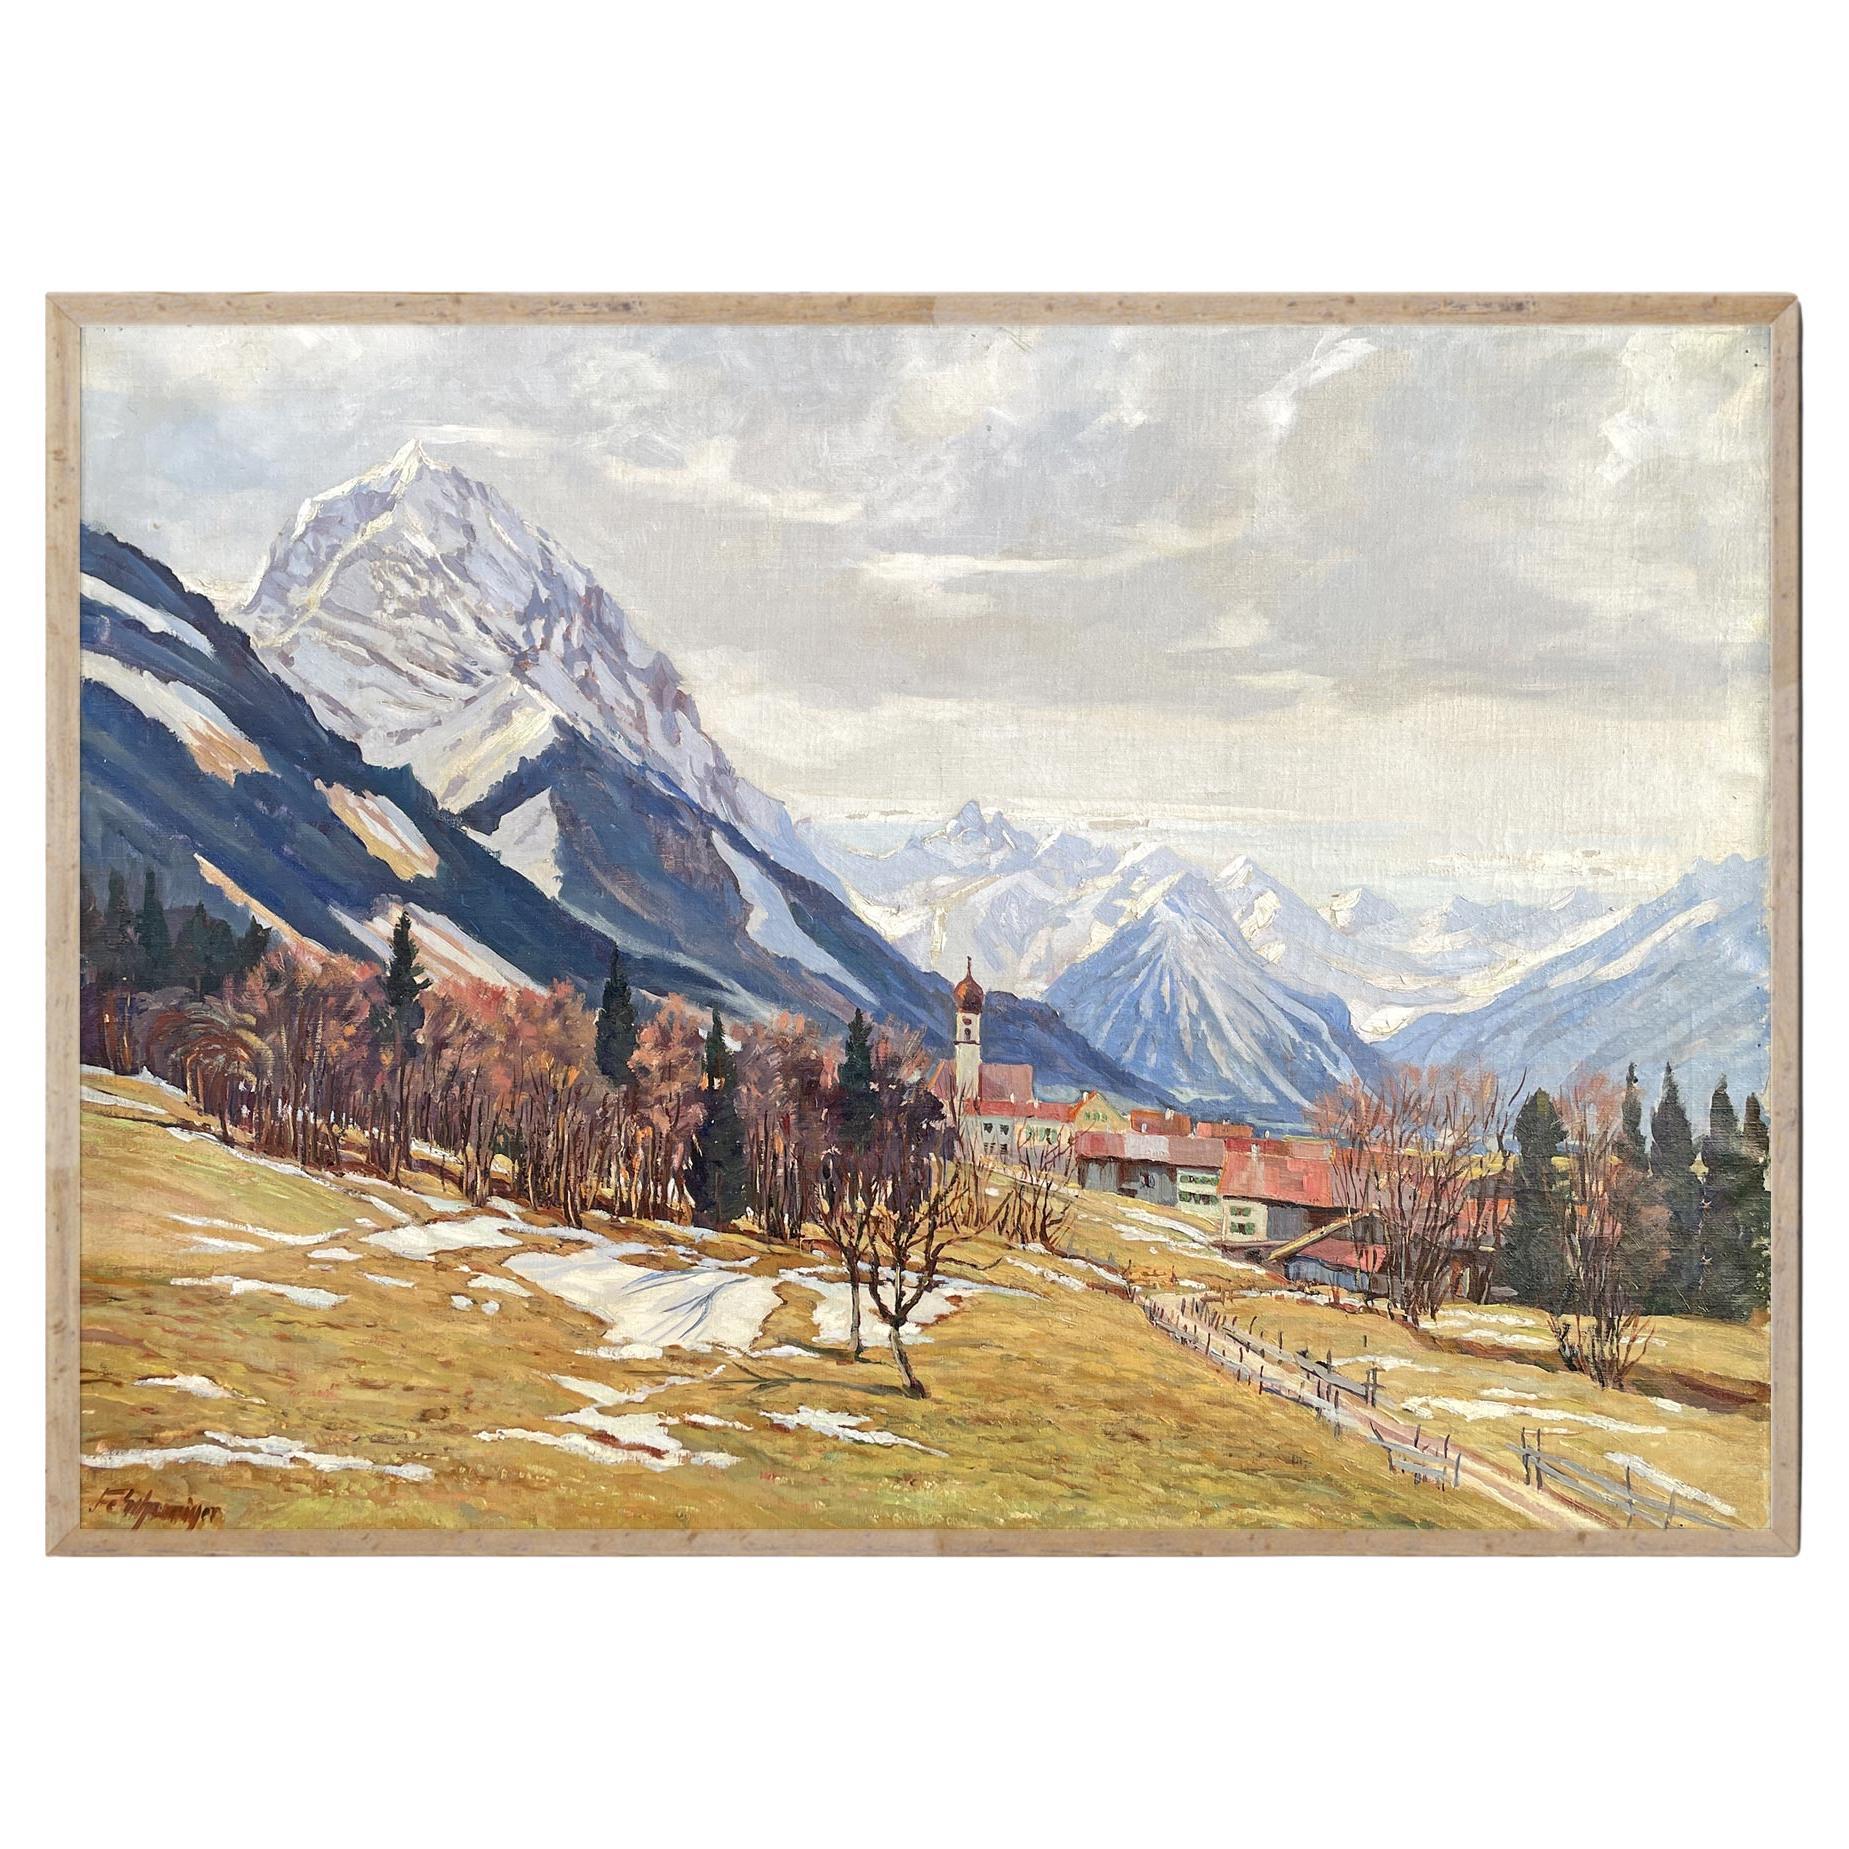 April in the mountains – Oil on Canvas by Fritz Schwaiger - 1920